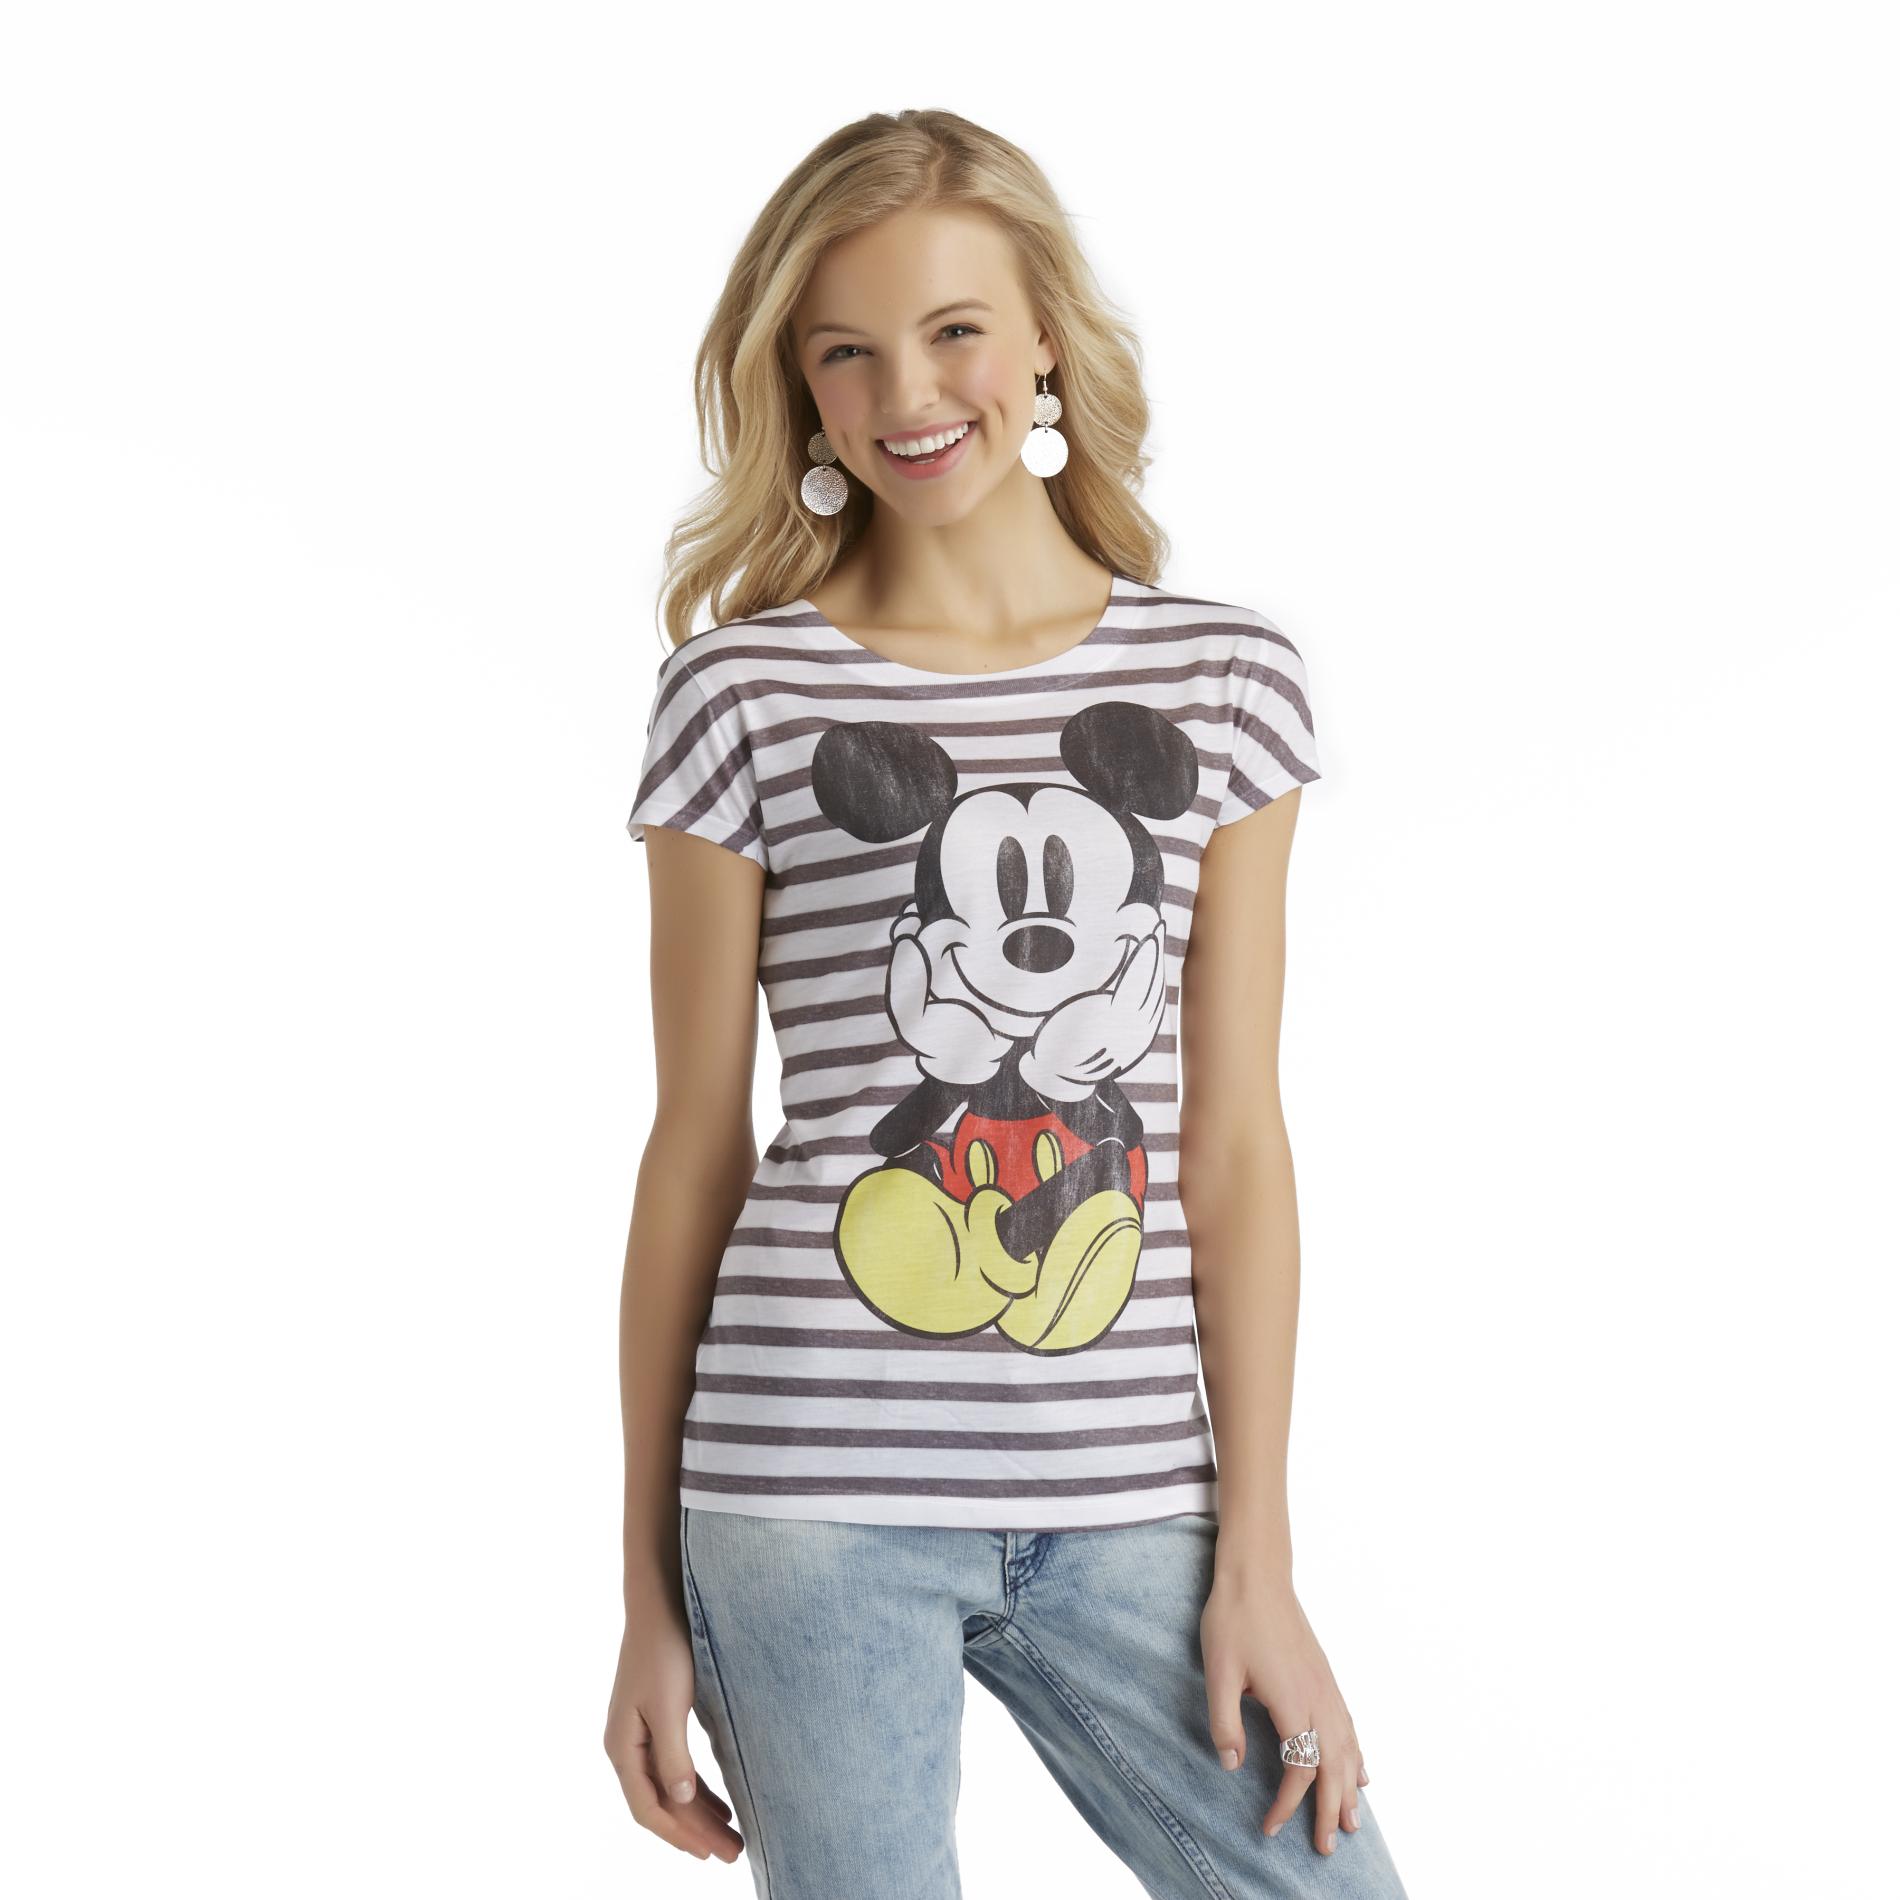 Disney Junior's Graphic T-Shirt - Mickey Mouse